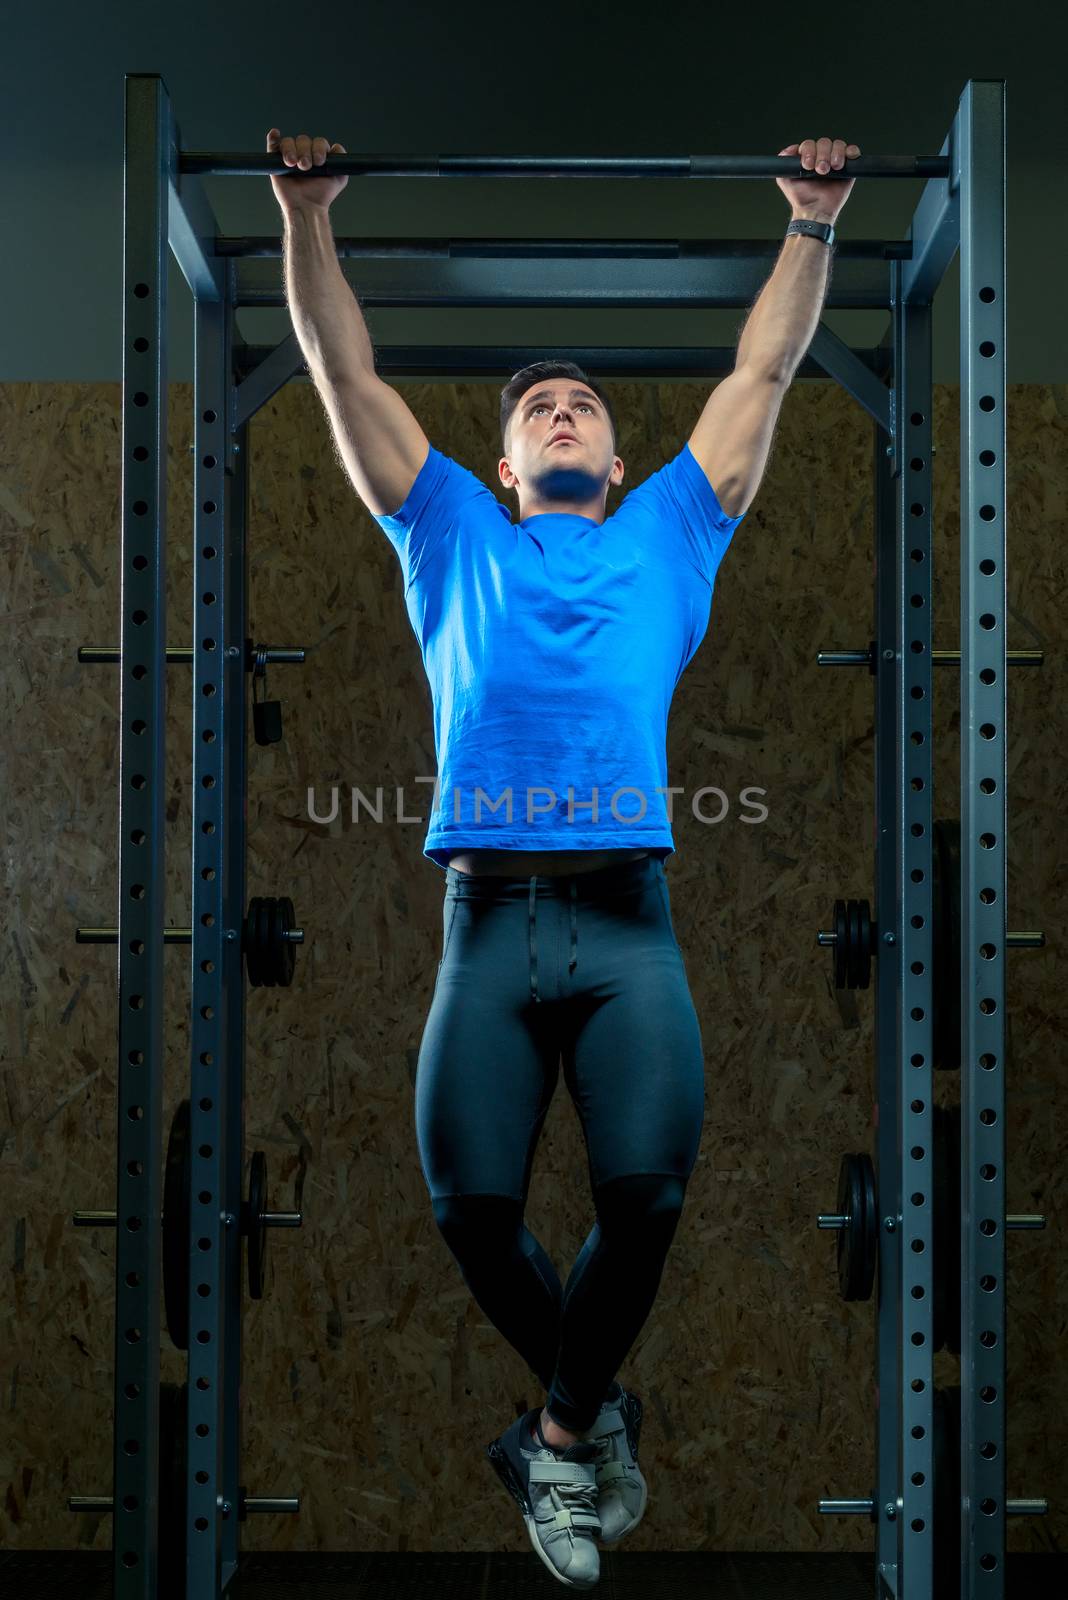 portrait of an athlete in the gym on equipment pulls up